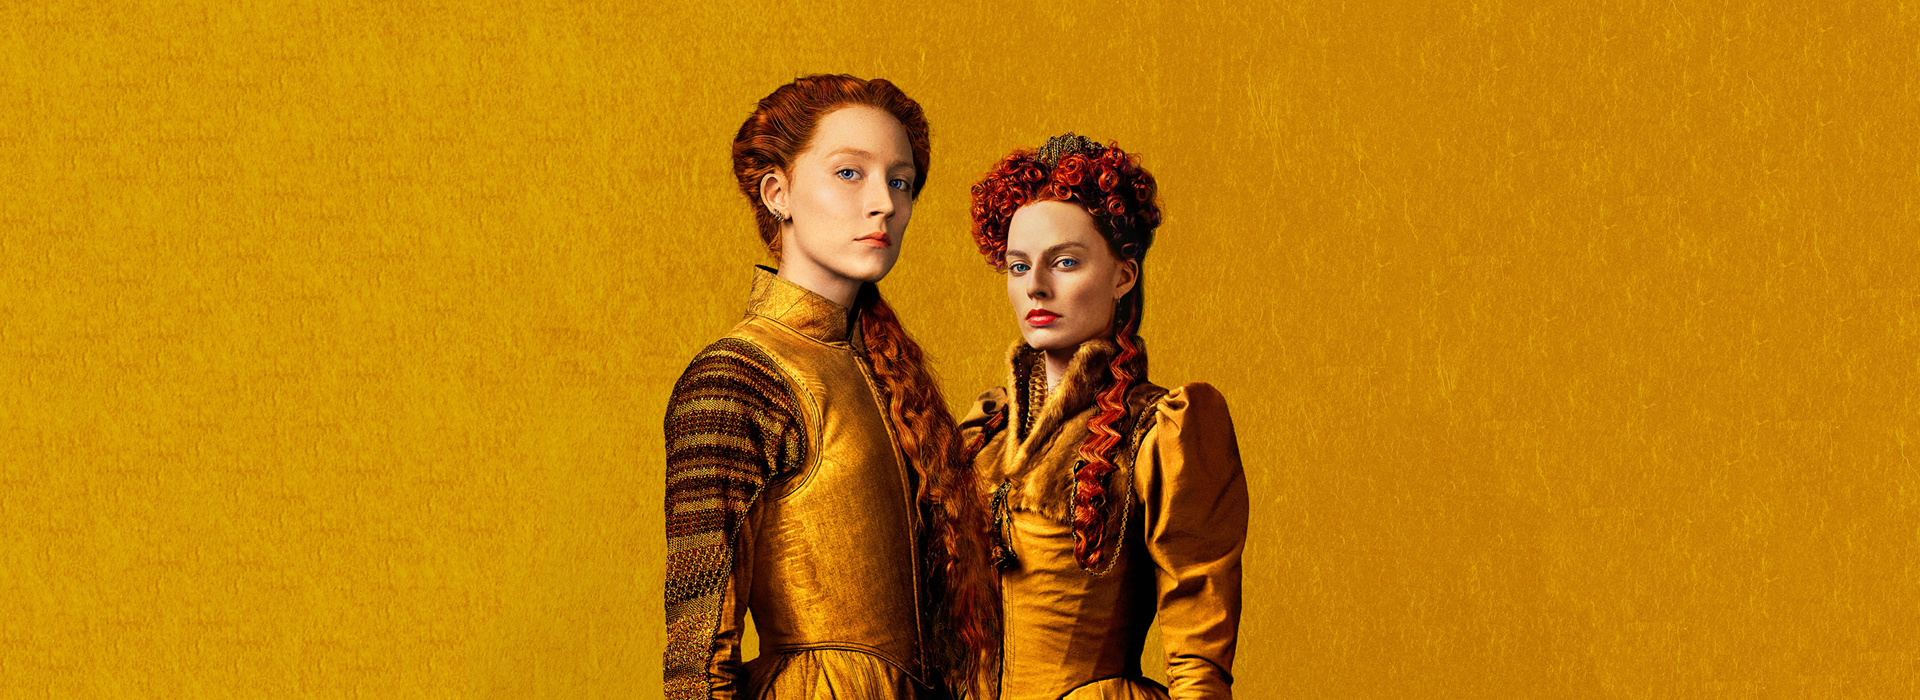 Movie poster Mary Queen of Scots